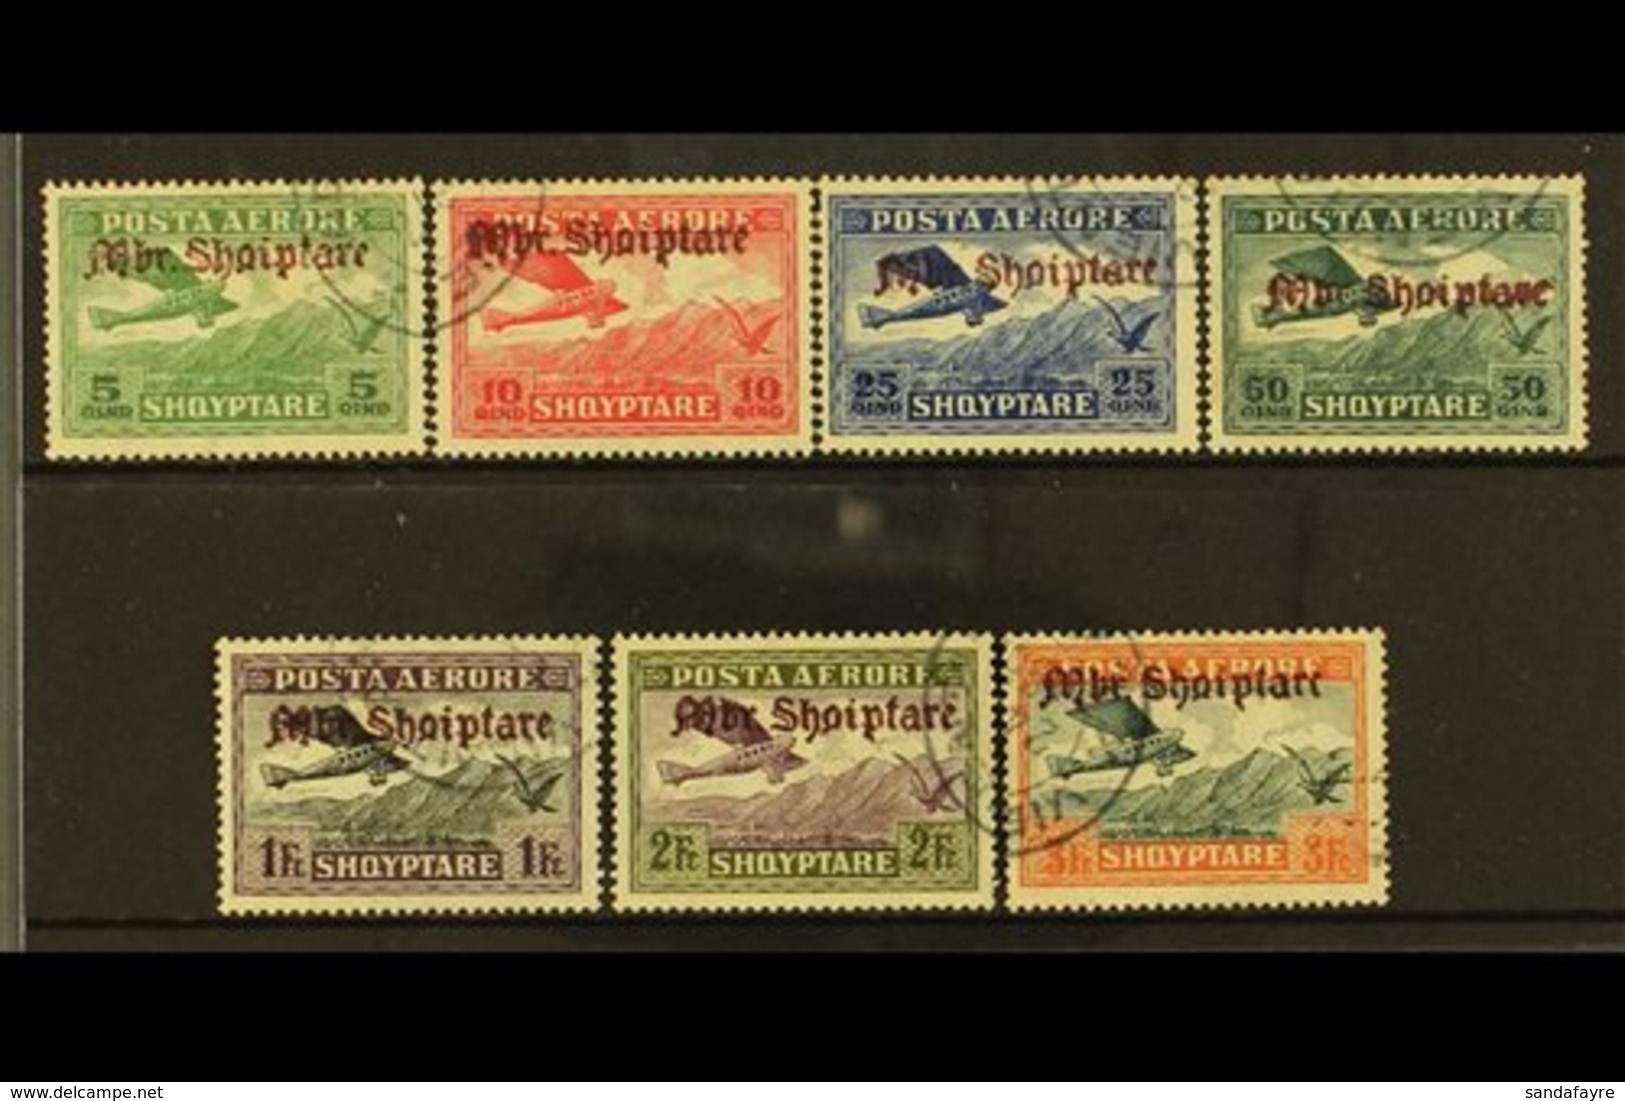 1929  Air "Mbr. Shqiptare" Overprints Complete Set (Michel 210/16, SG 270/76), Very Fine Used, Fresh & Scarce, Cat £1,80 - Albania